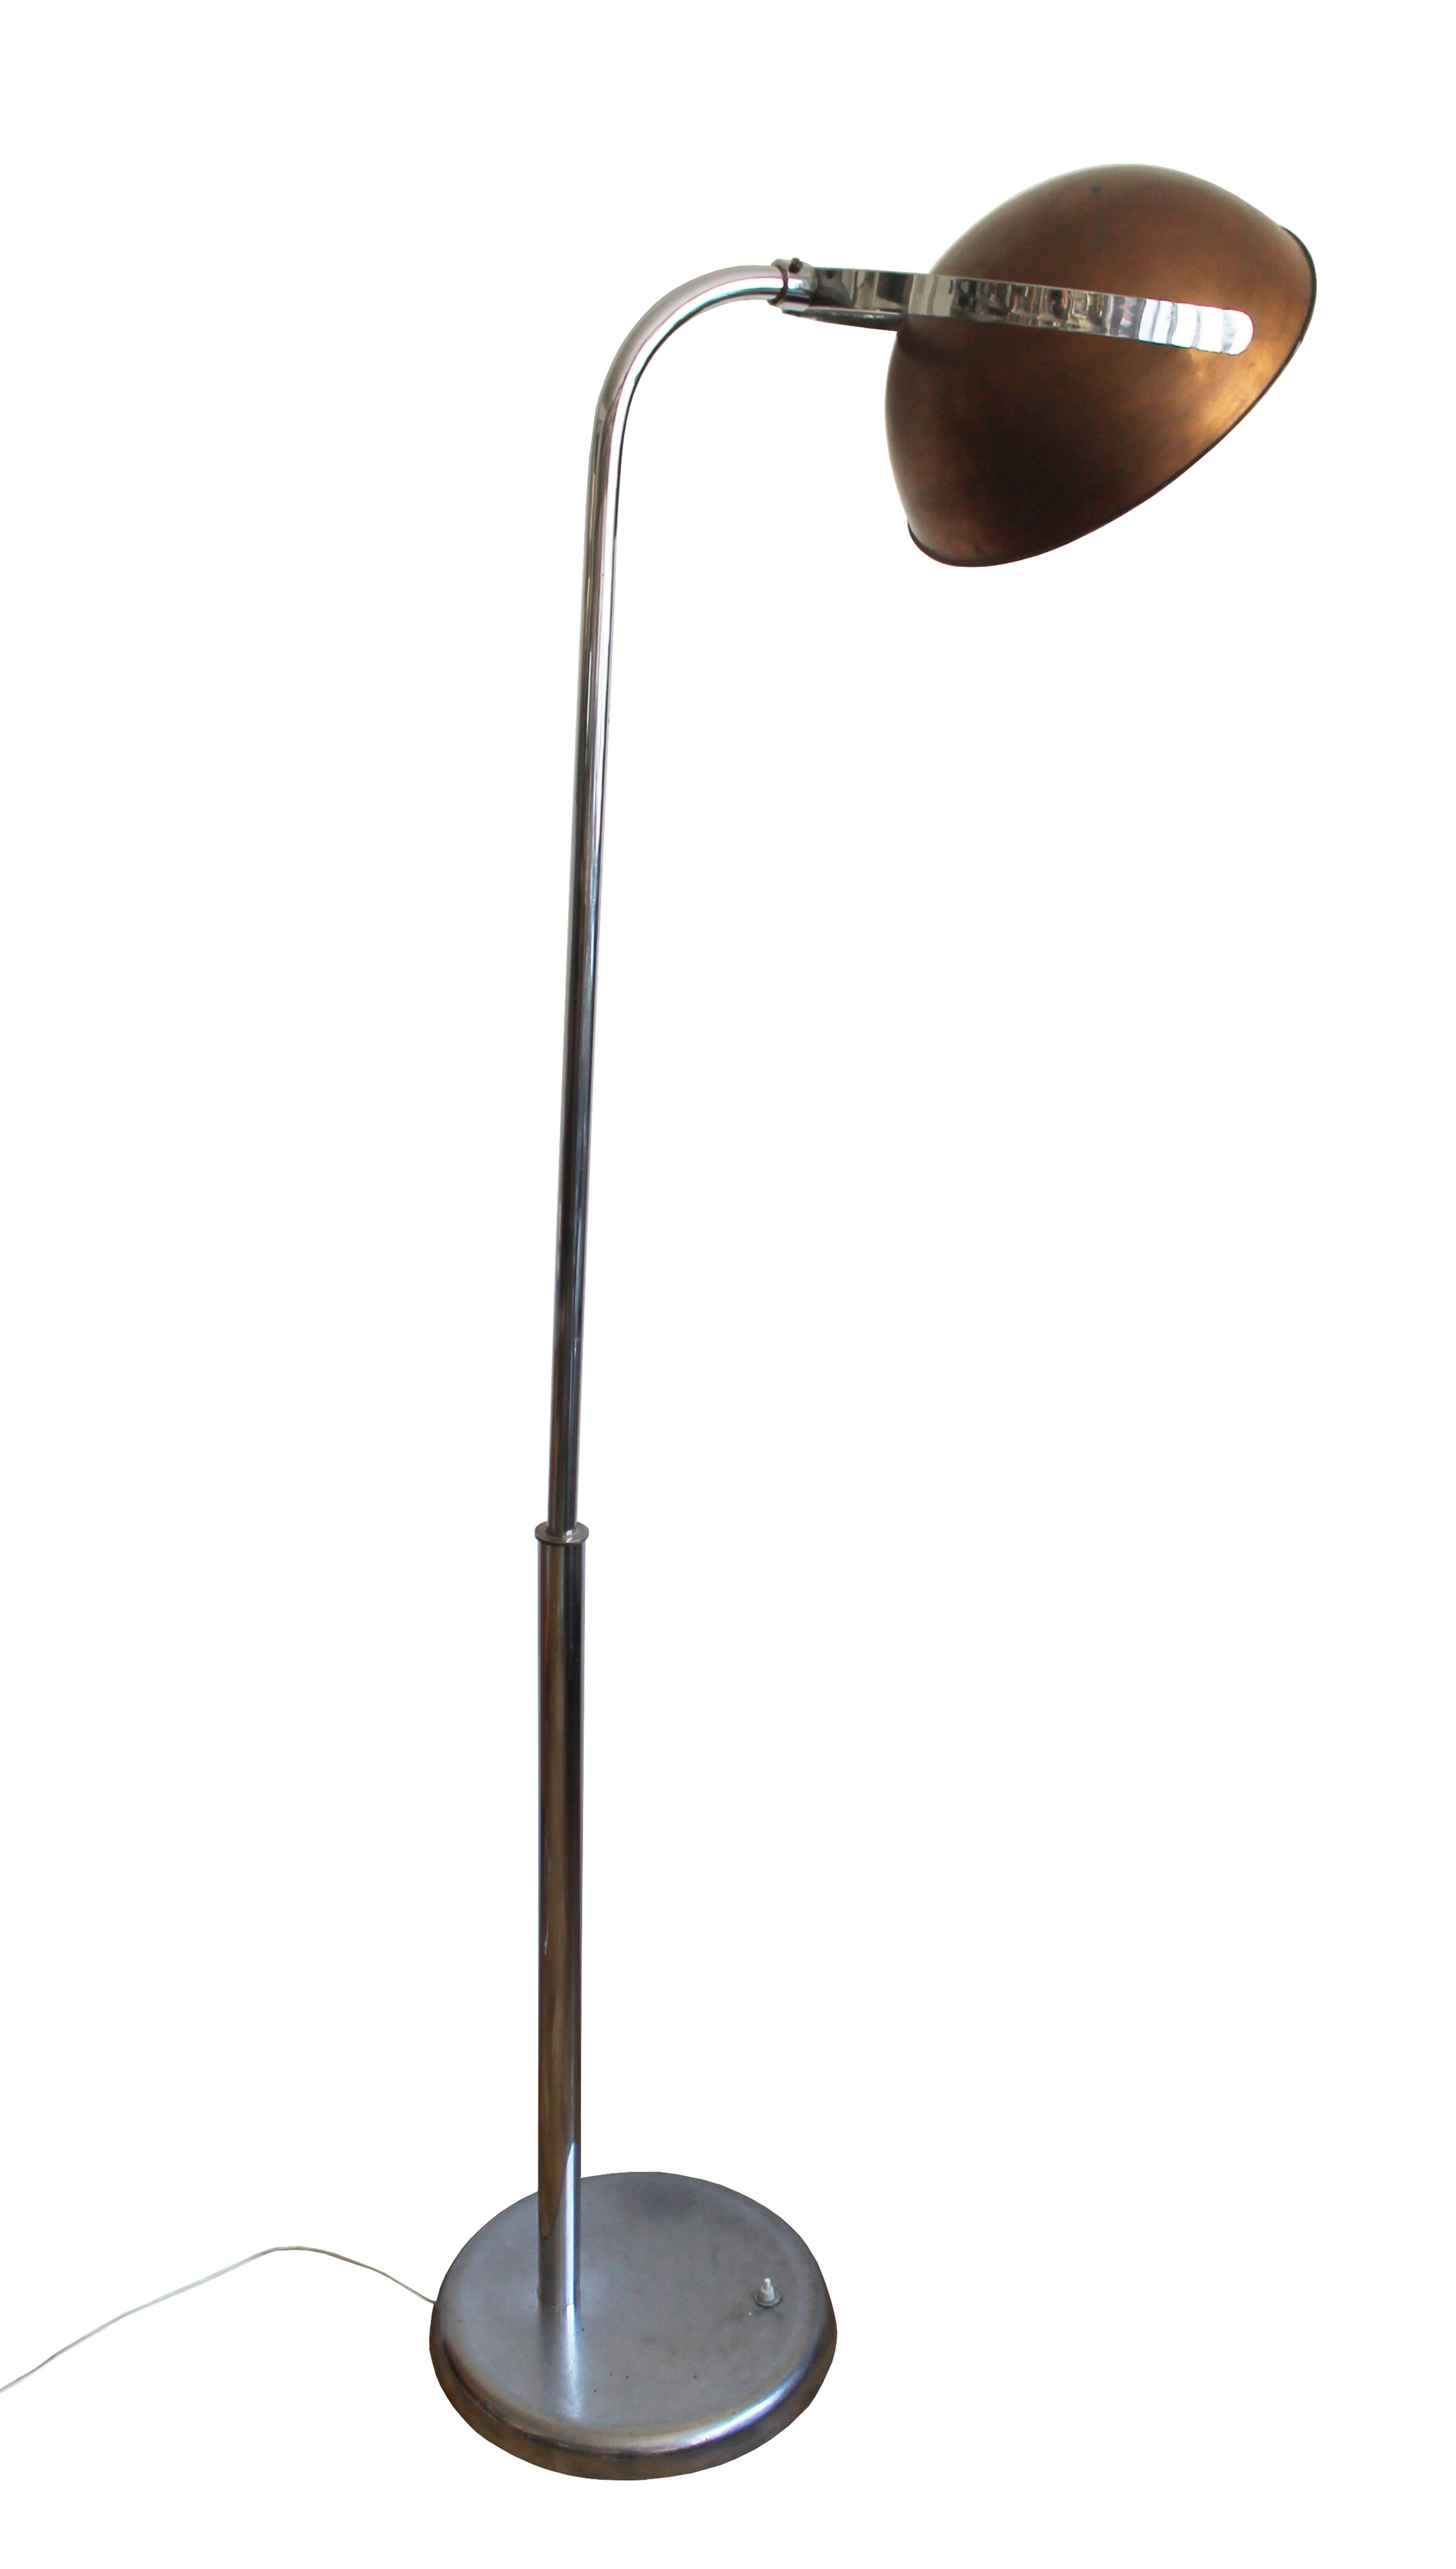 This is an original piece made in 1930’s Czechoslovakia. A striking dominant floor lamp, with super sized proportions. A large copper headlight that is adjustable, supported by a stainless steel up-stand, this piece is unusually striking. Used as a